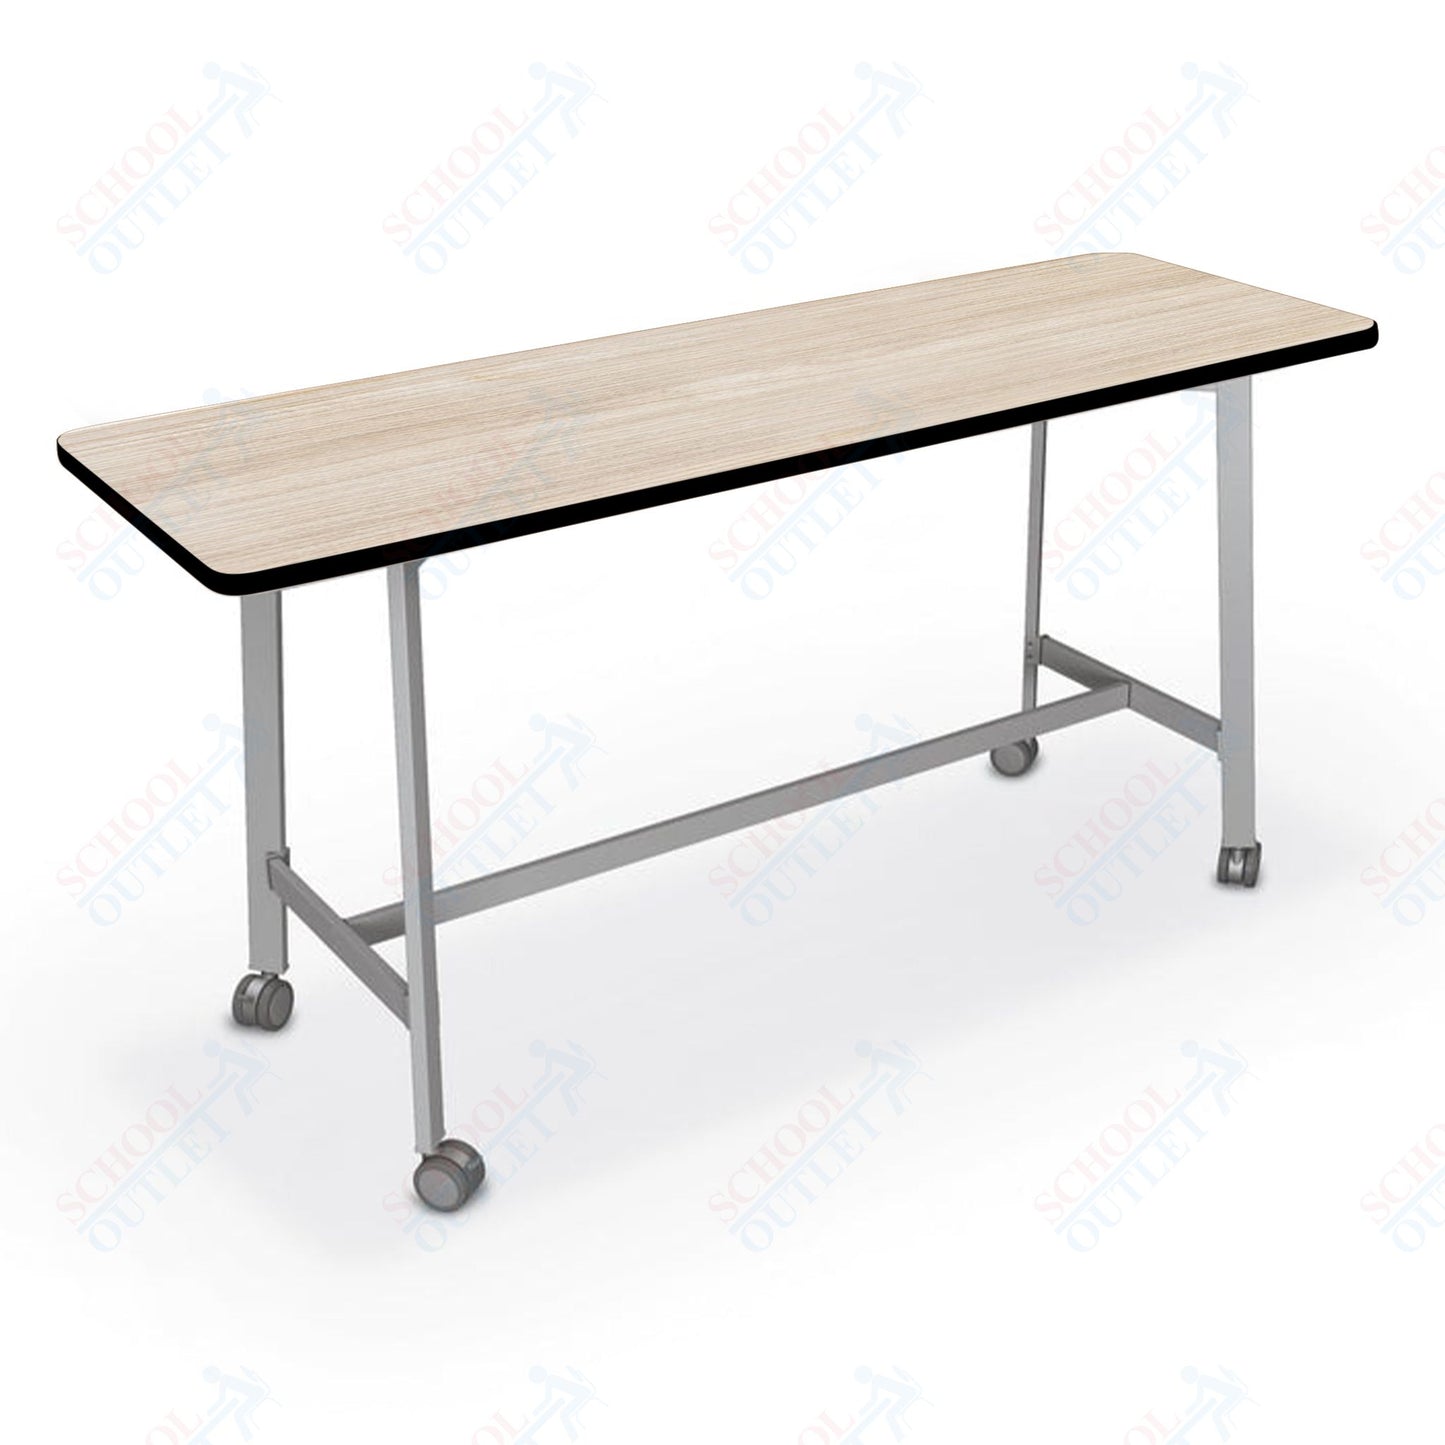 Mooreco Akt Table – 20"D x 72"W Rectangle, Laminate Top, Fixed Height Available in 29"H, 36"H, or 42"H